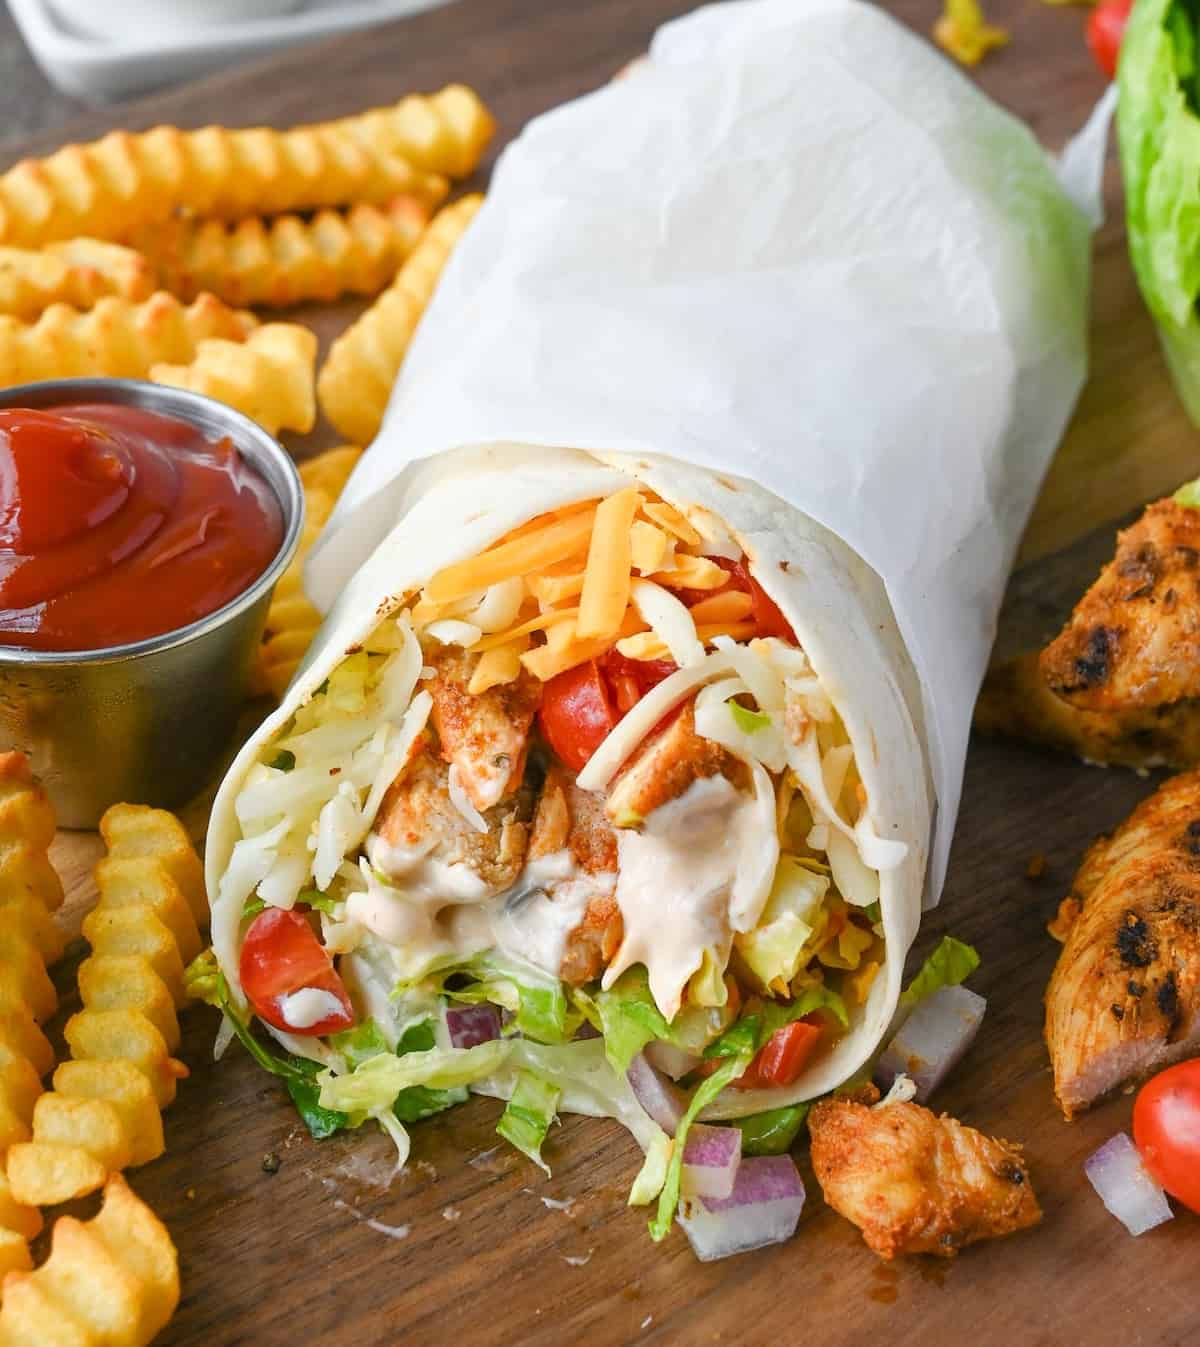 Grilled chicken wrap with a side of fries and ketchup.